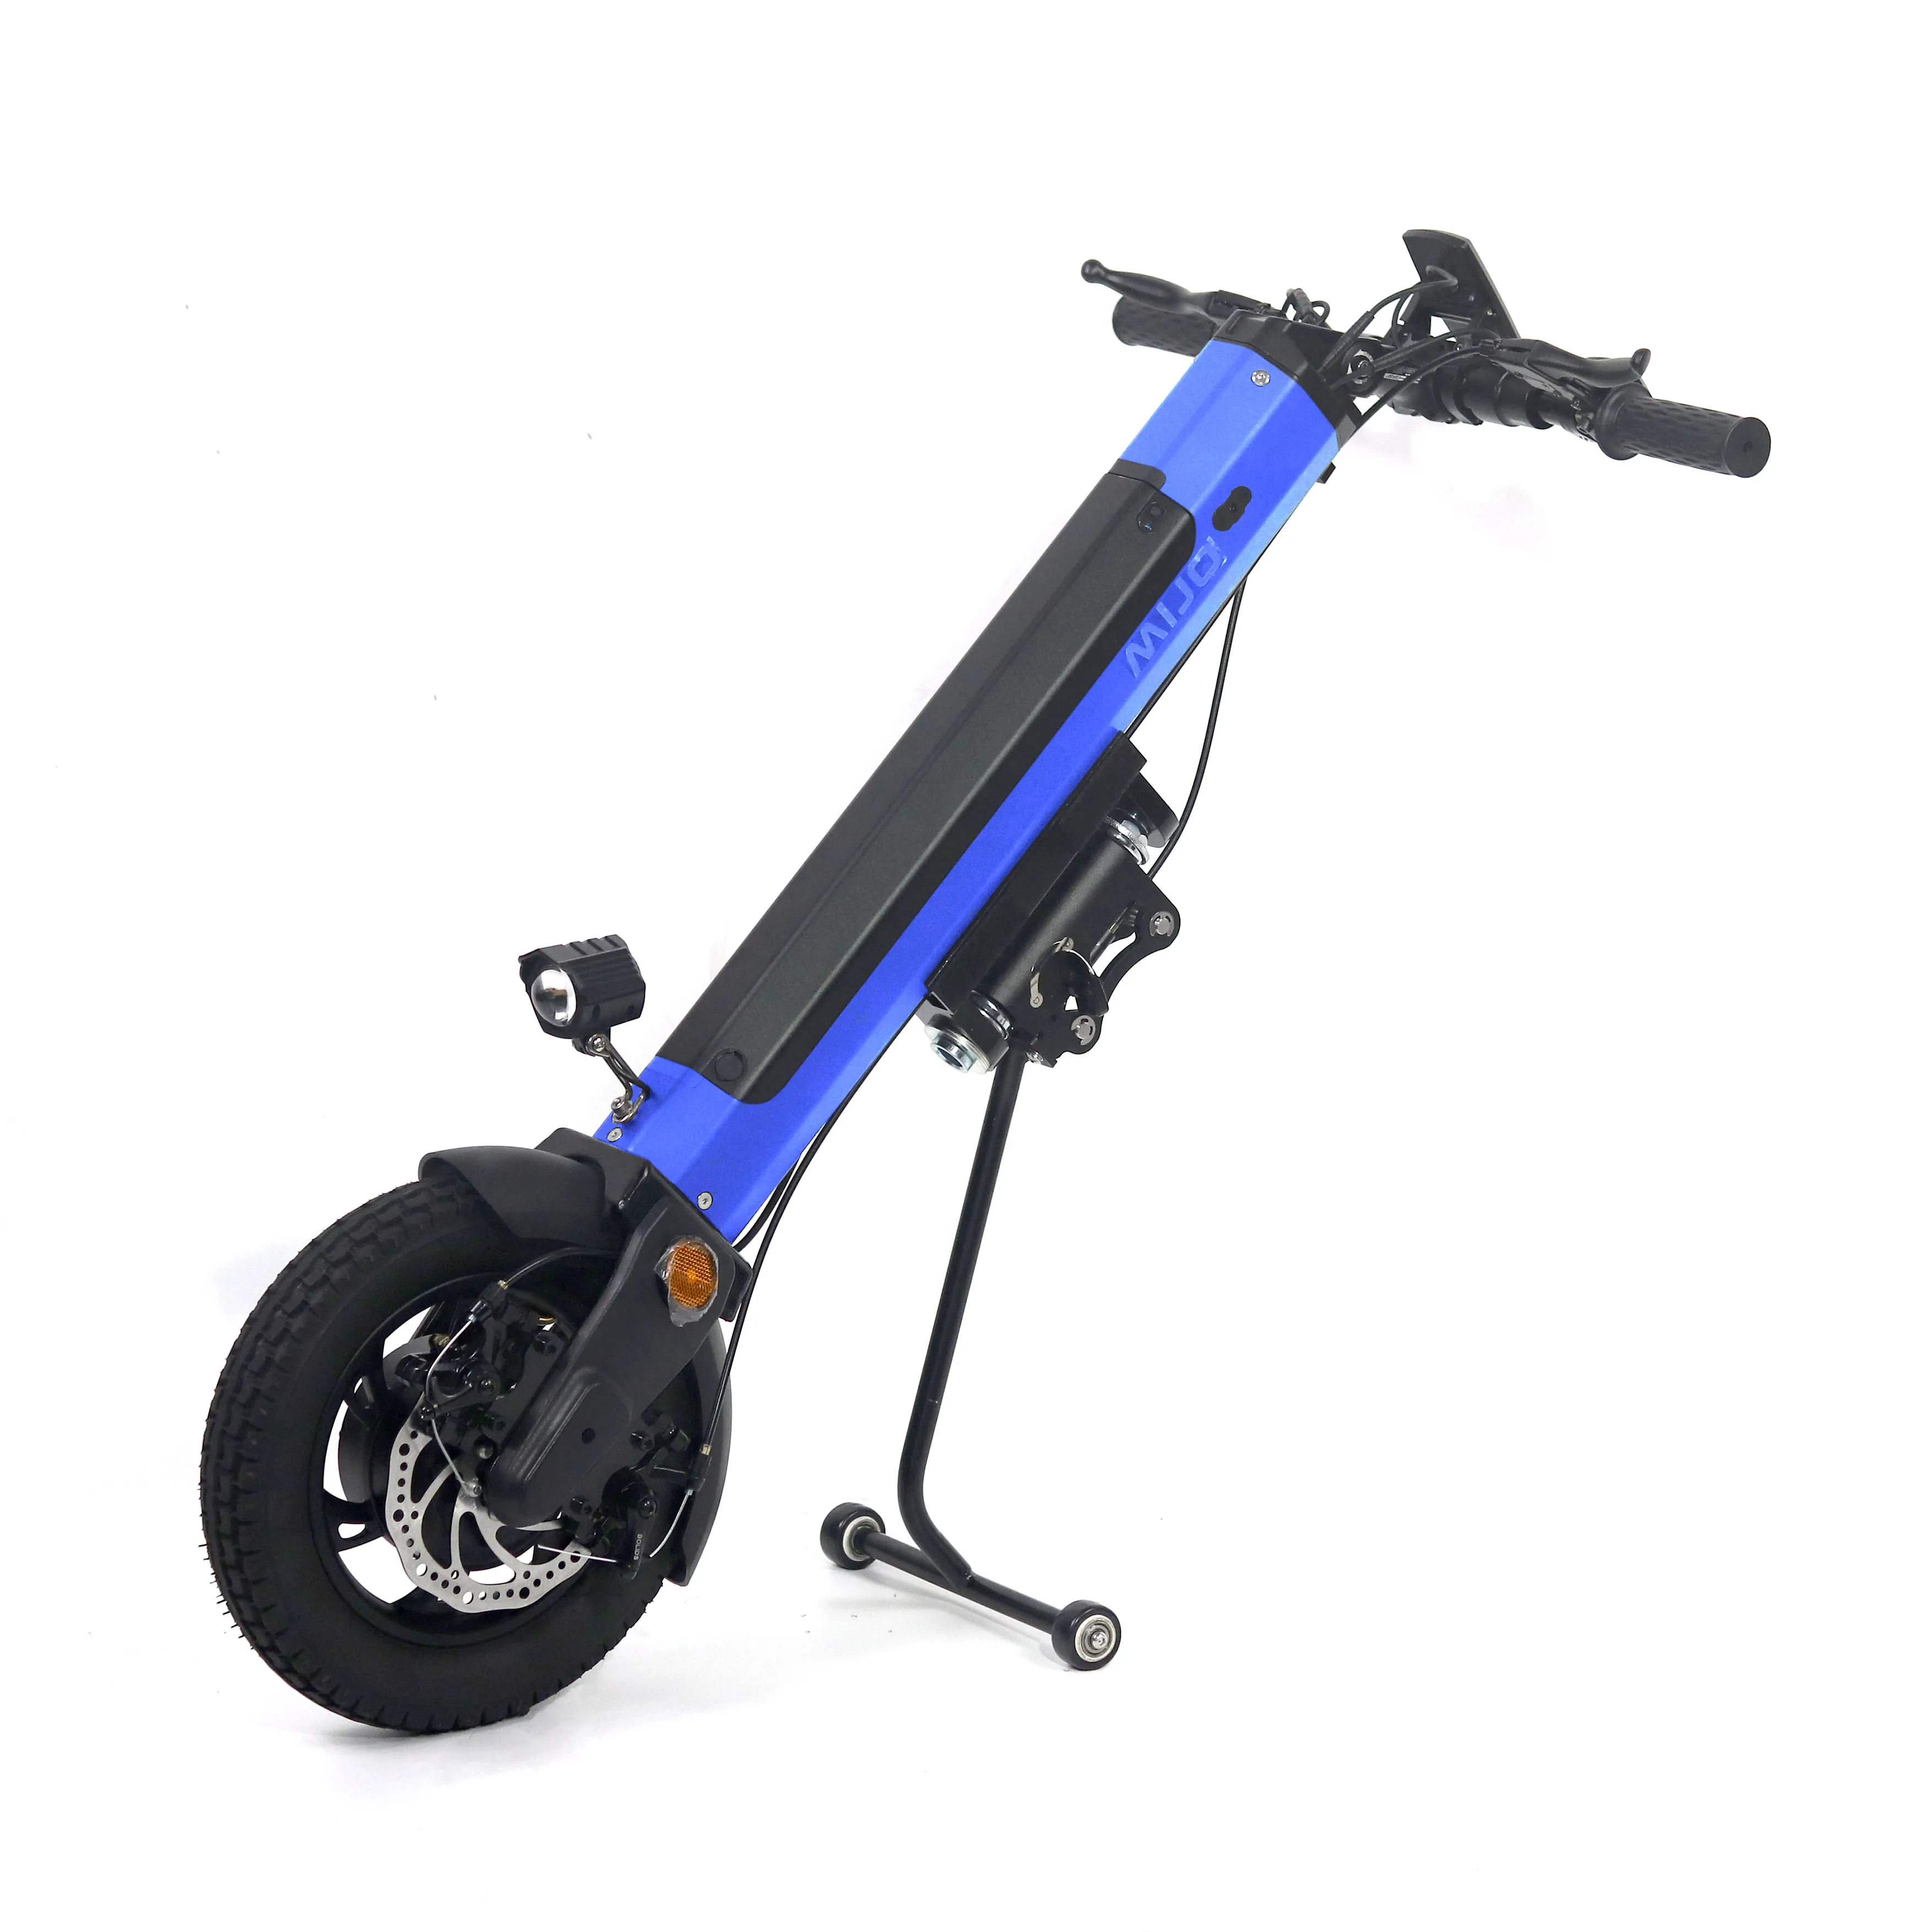 Portable and Comfortable Electric Handcycle Wheelchair Attachment 350W Wheelchair Drive Head with 36V 13Ah Lithium battery ce rohs approved wp 02 36v 350w electric wheelchair attachment trailer electric manual bike manual wheelchair